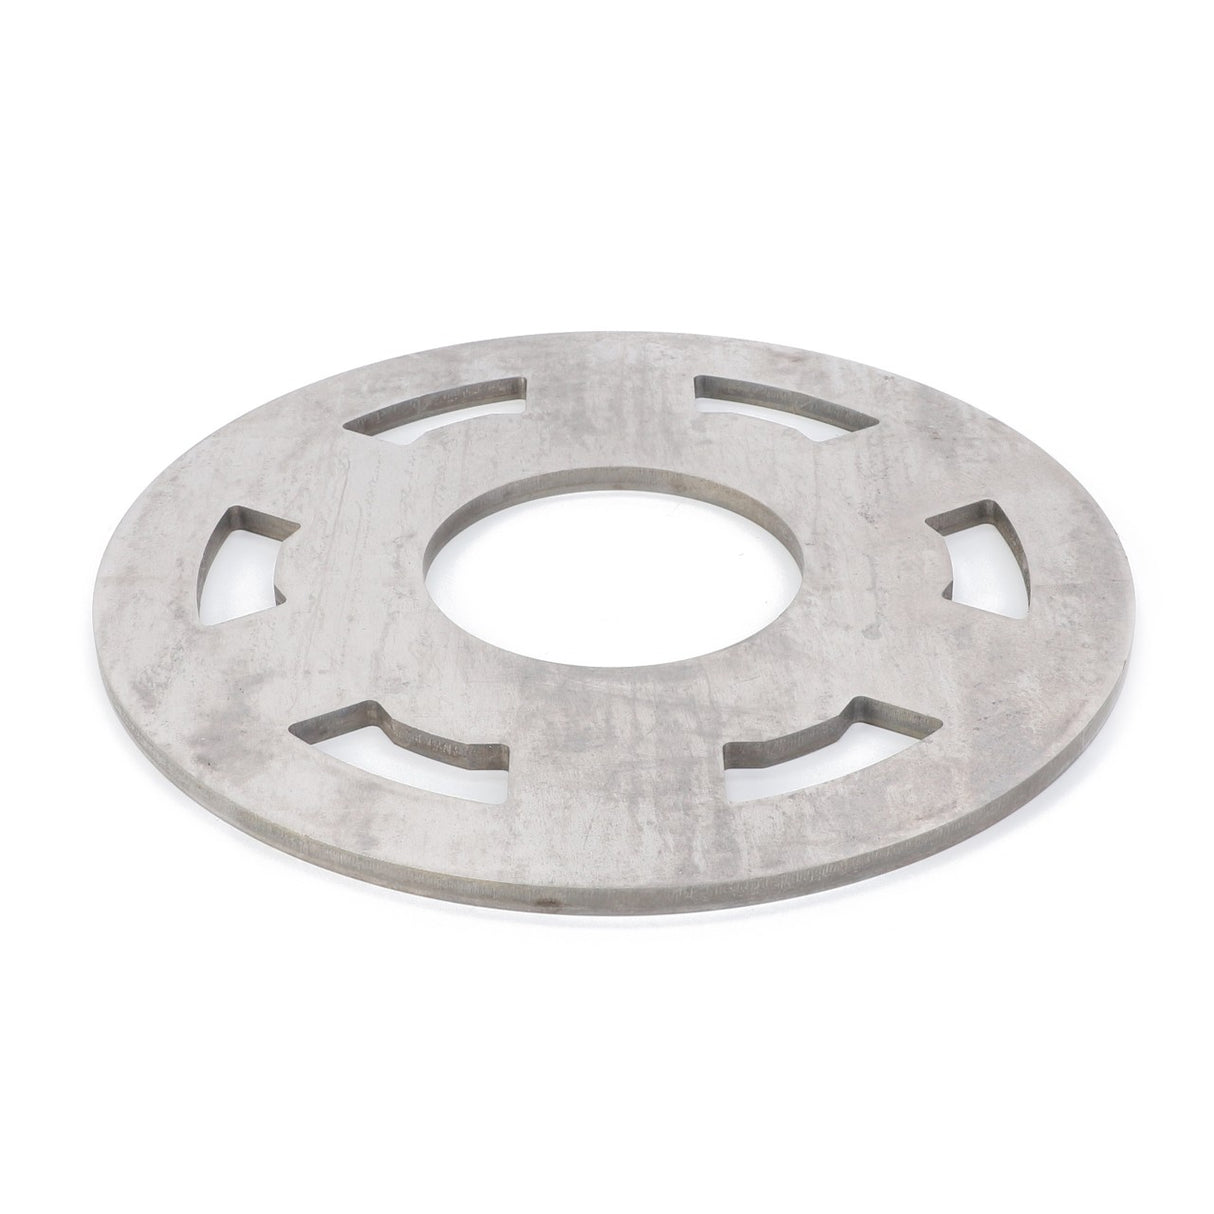 AGCO | Support Plate - 3617345M1 - Farming Parts